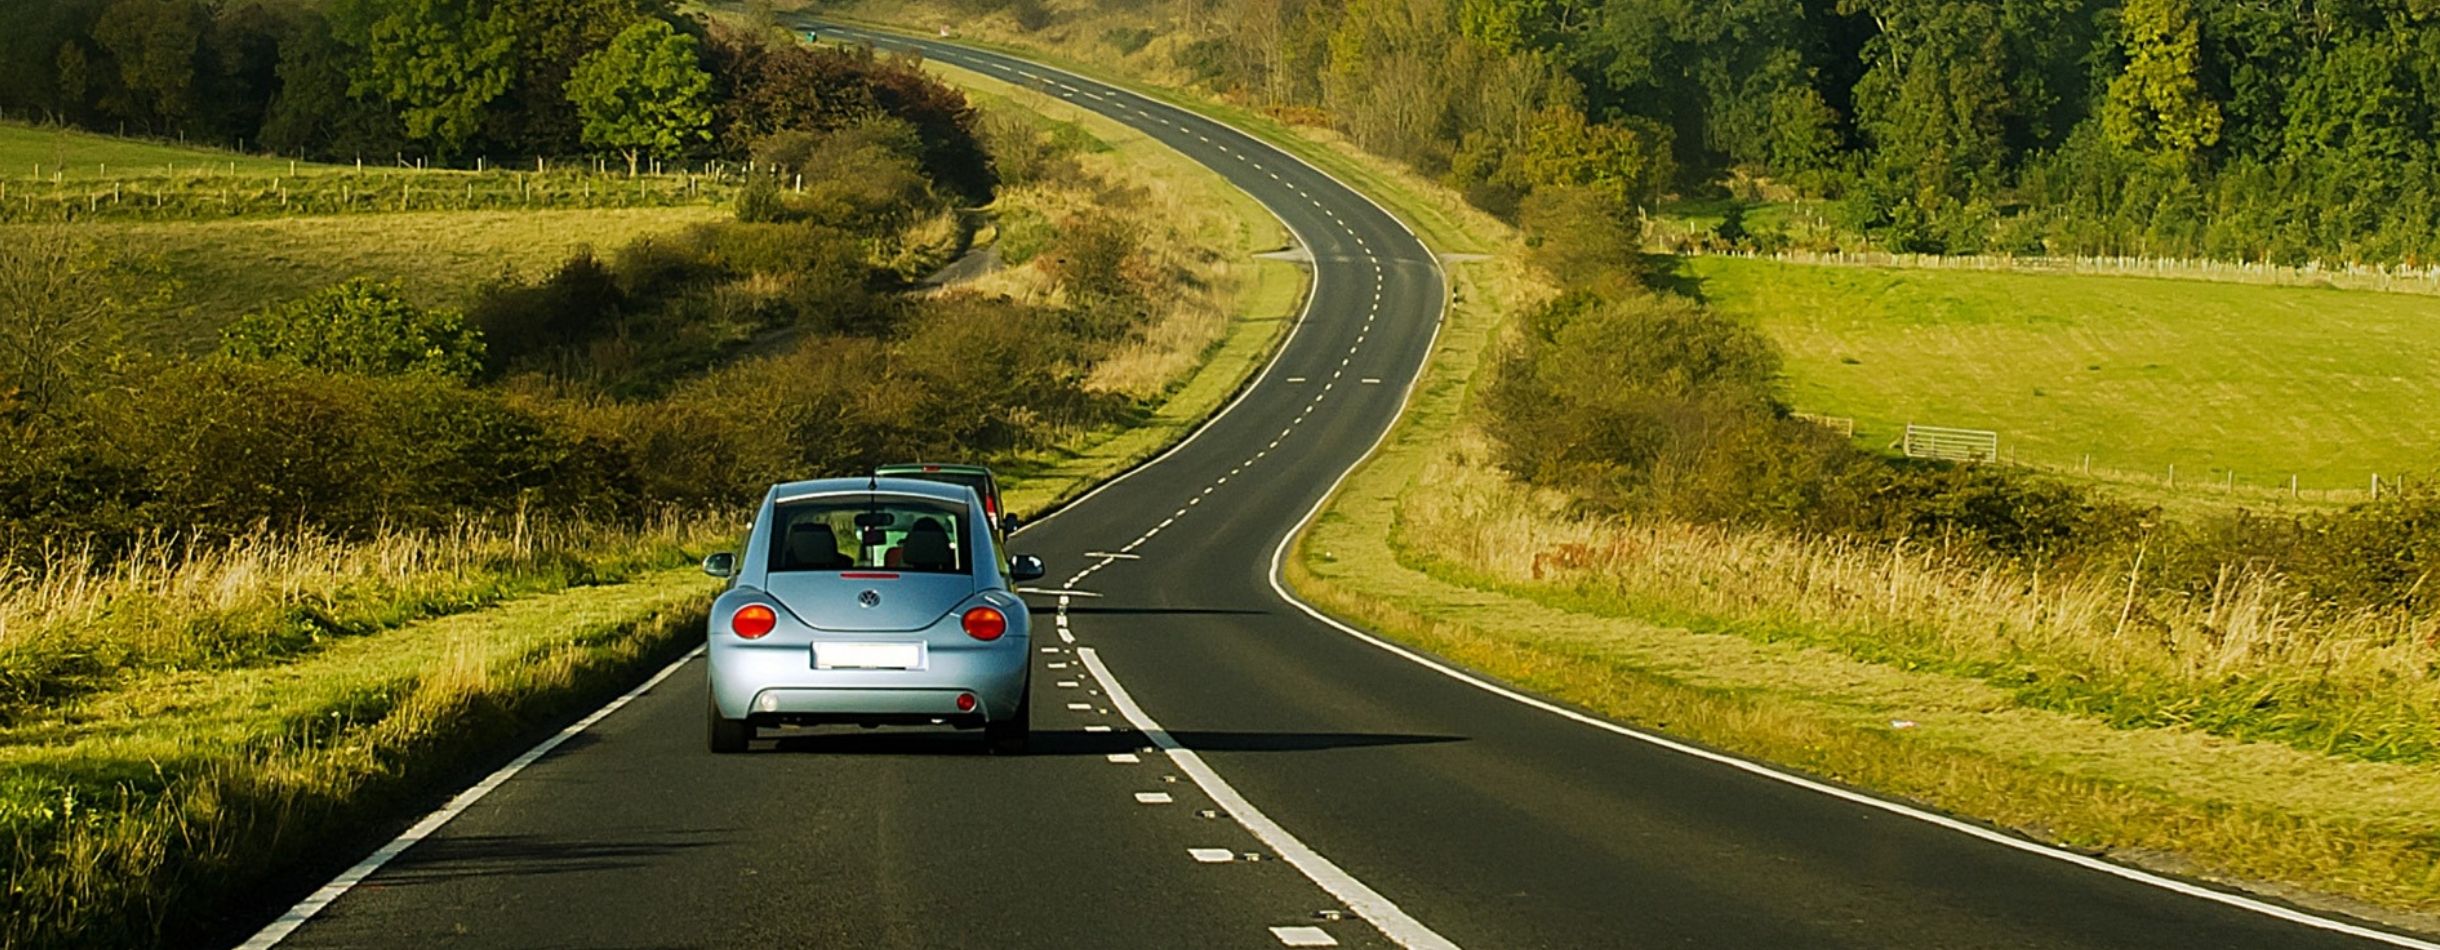 Two small cars traveling along an empty road with grass fields and short tree lines on each side.